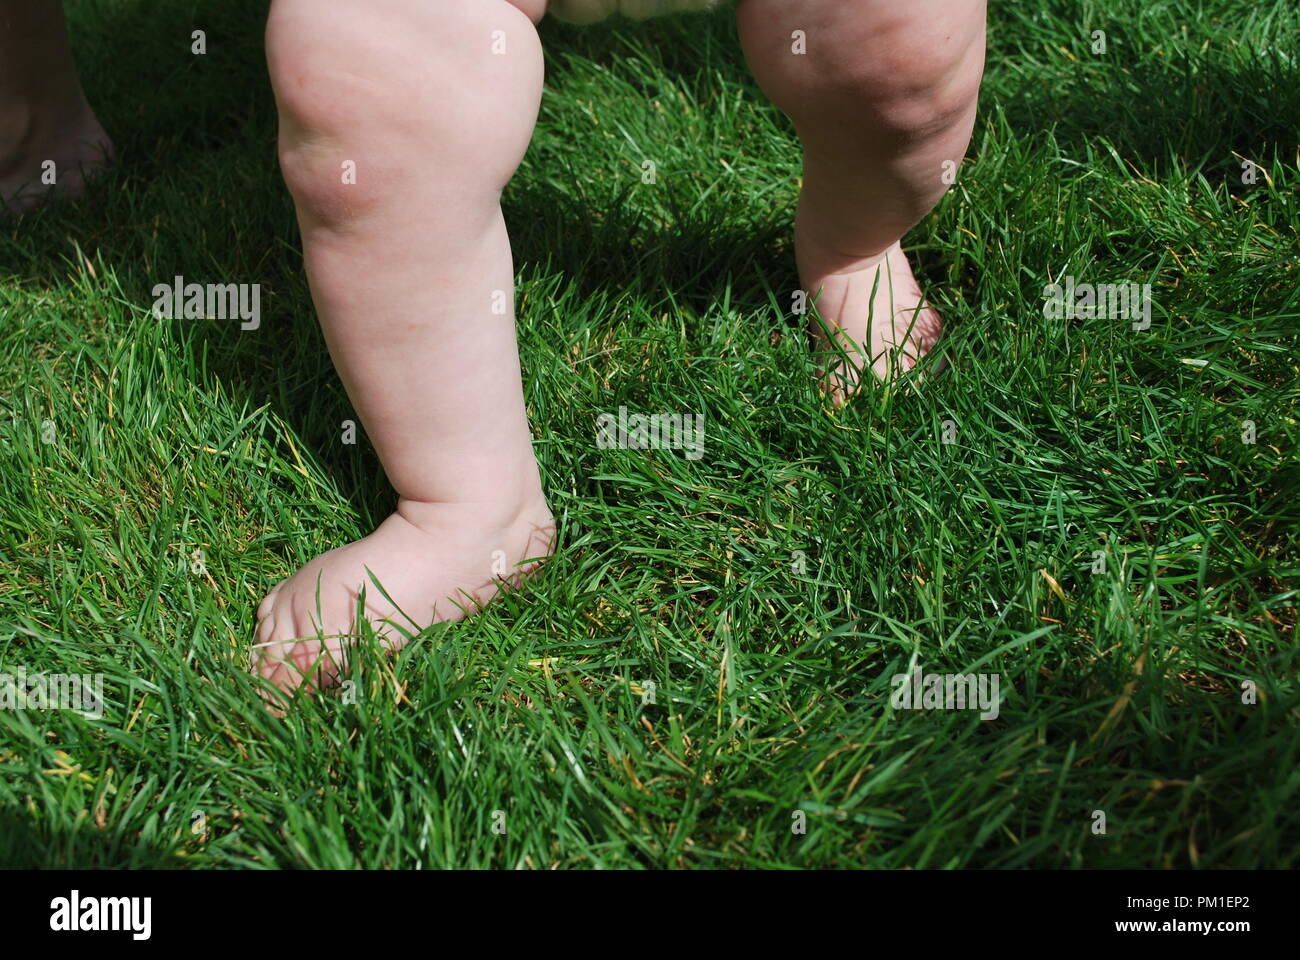 baby feet and legs on grass walking first steps Stock Photo